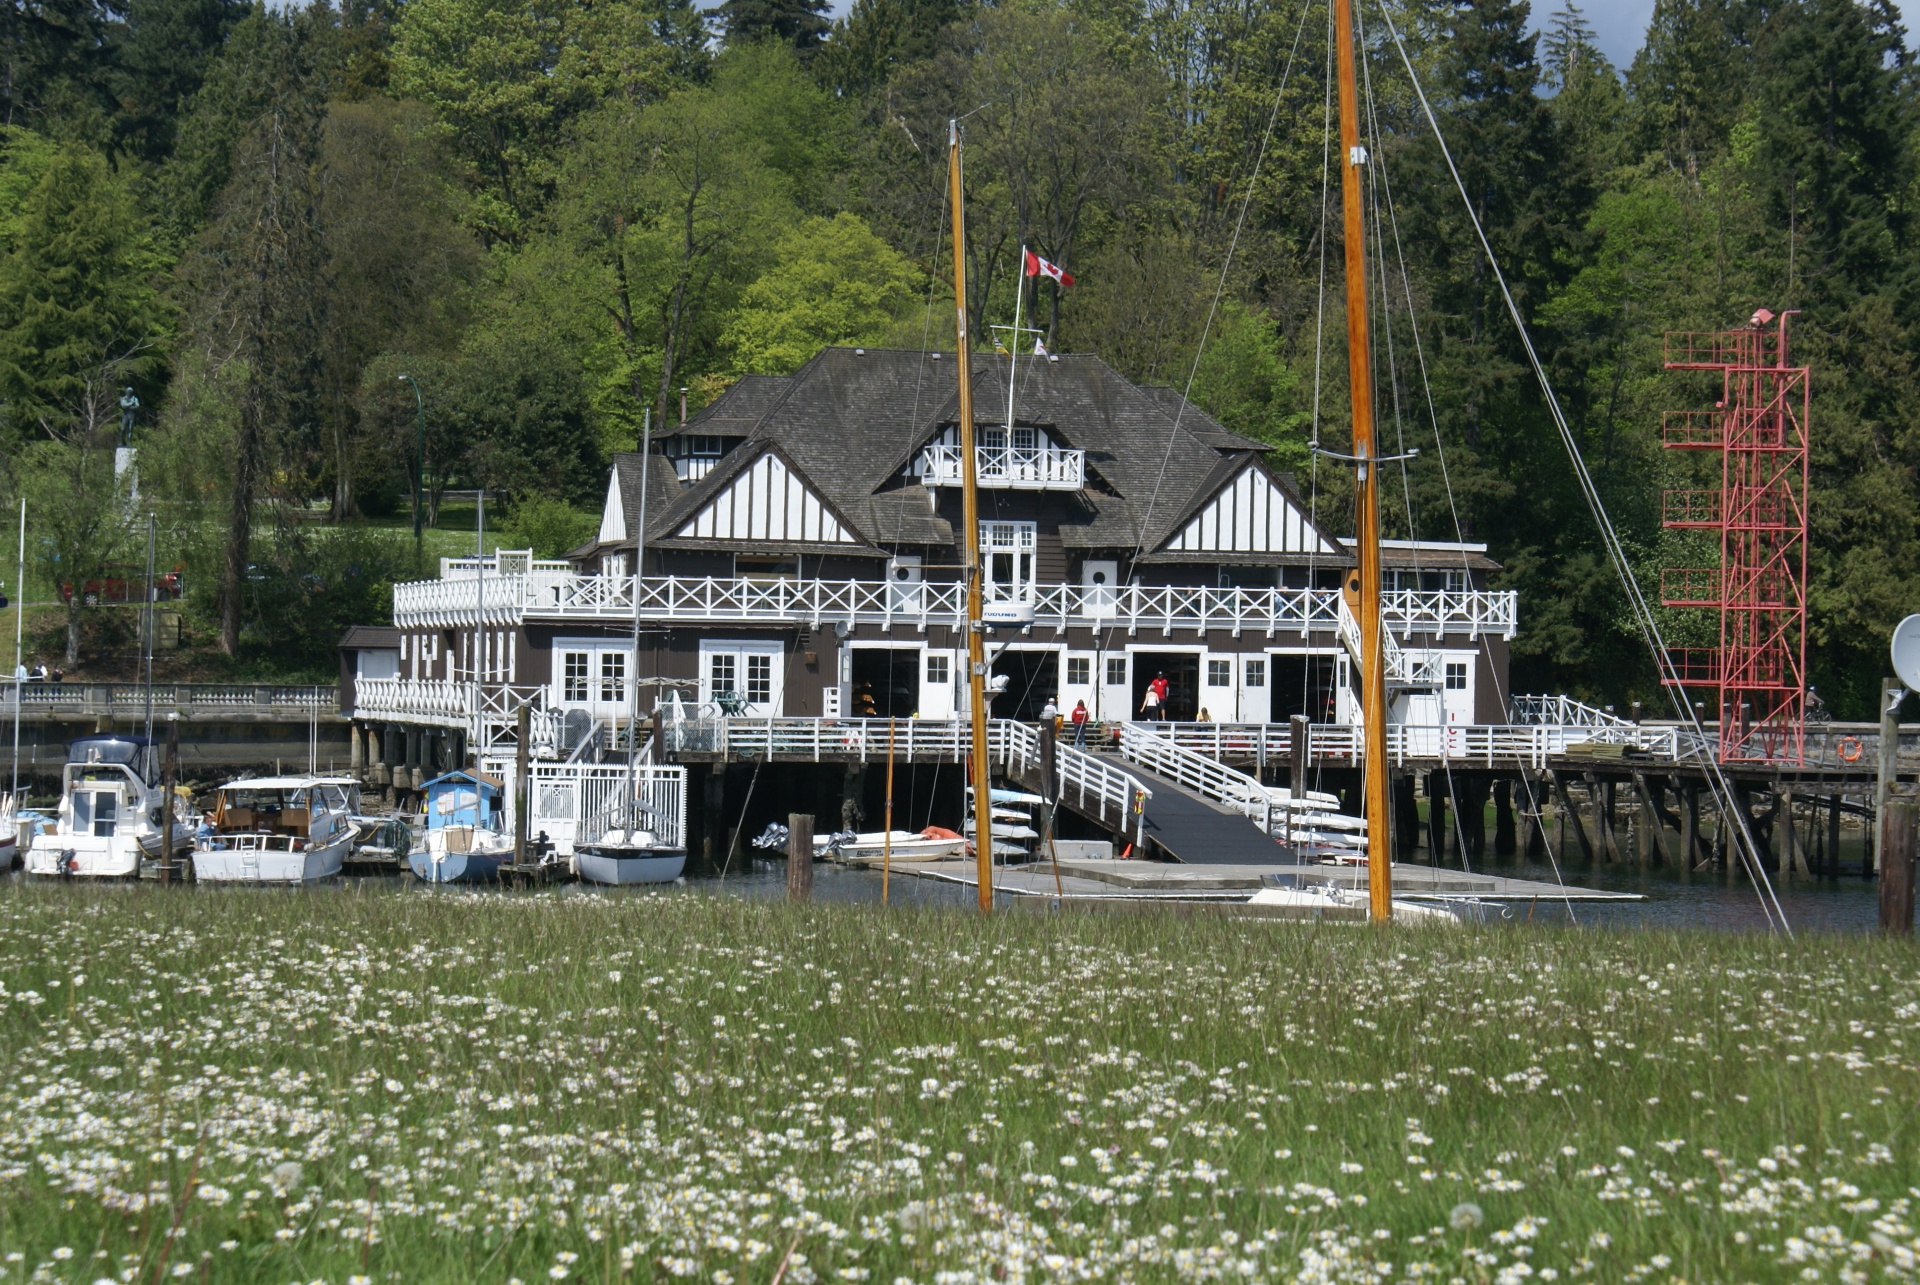 Historic Royal Yacht Club at Stanley Park Vancouver with yachts moored in front and leafy trees behind.